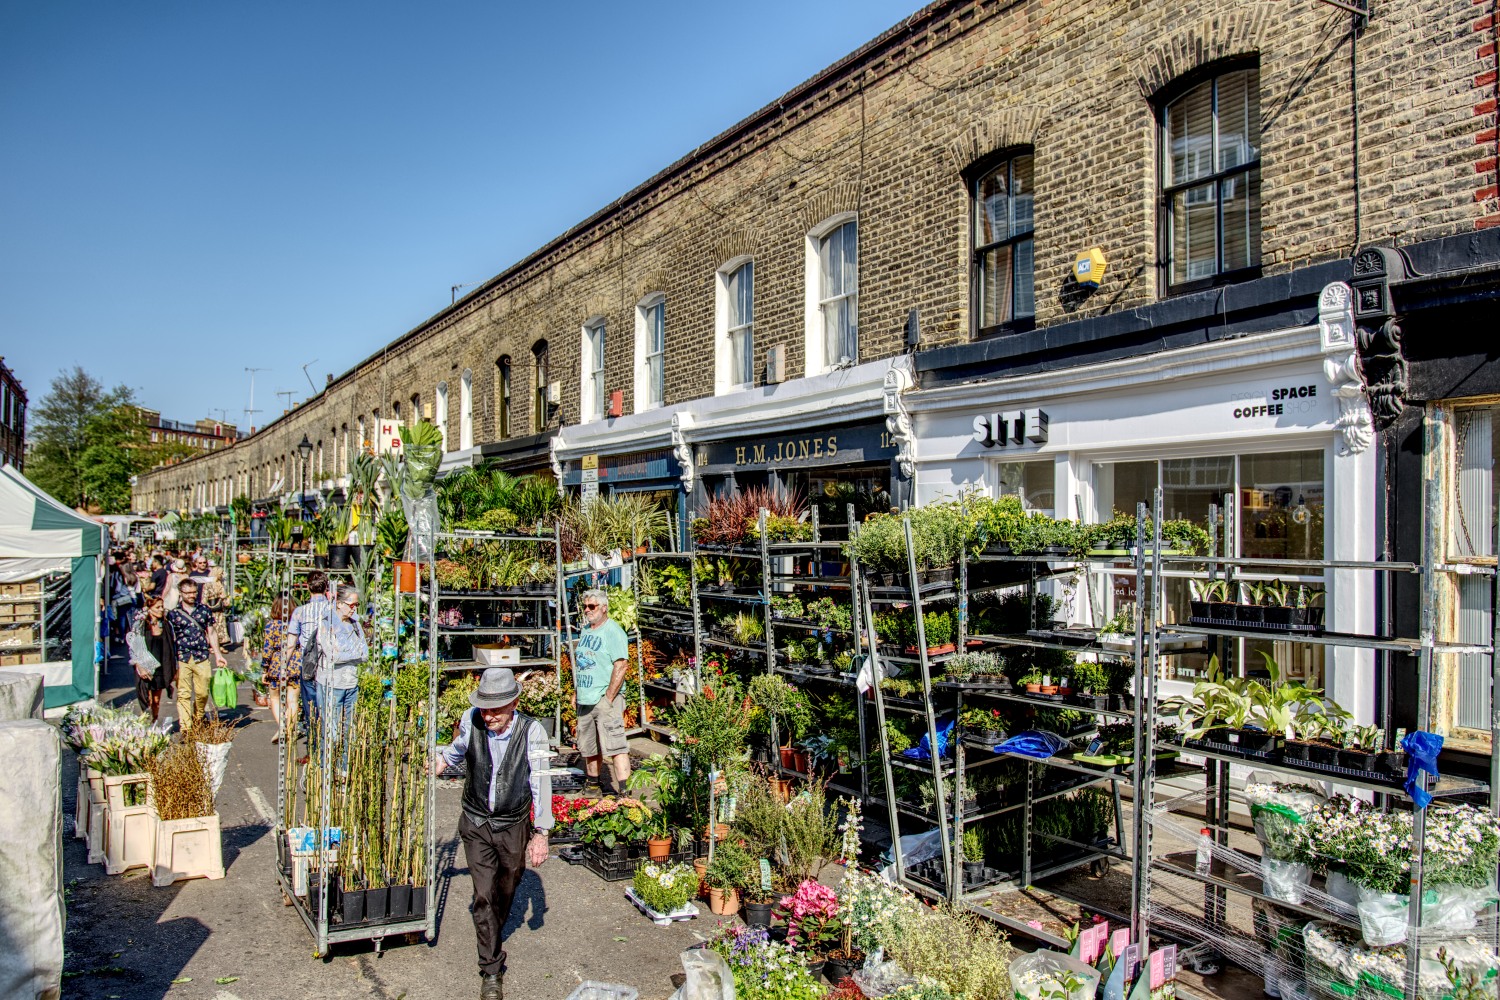 Columbia Road Flower Market traders pack their stands